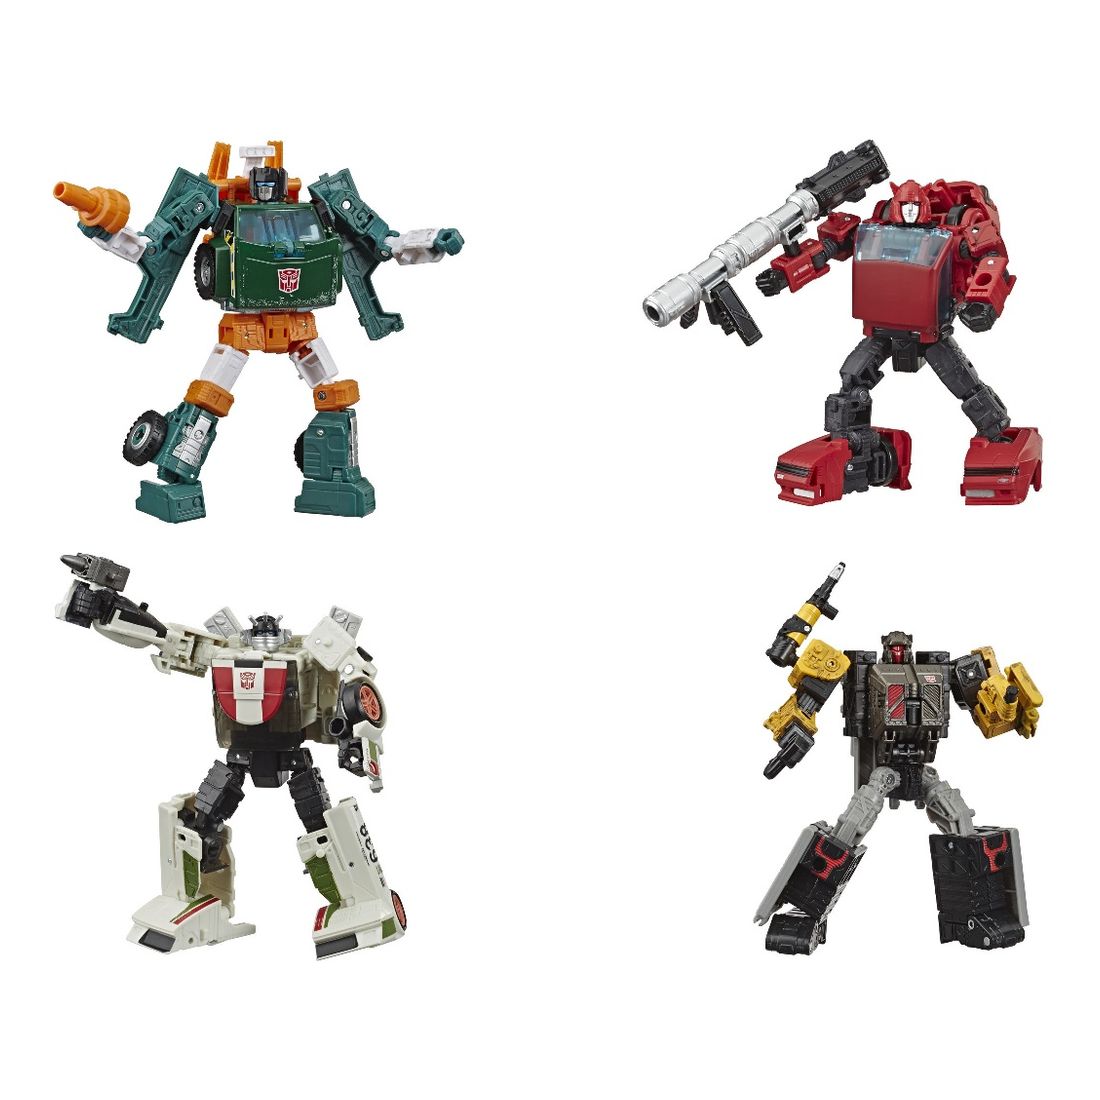 Hasbro Takara Tomy Transformers War For Cybertron Earthrise Deluxe Figure 5.5 inch (Assortment - Includes 1)